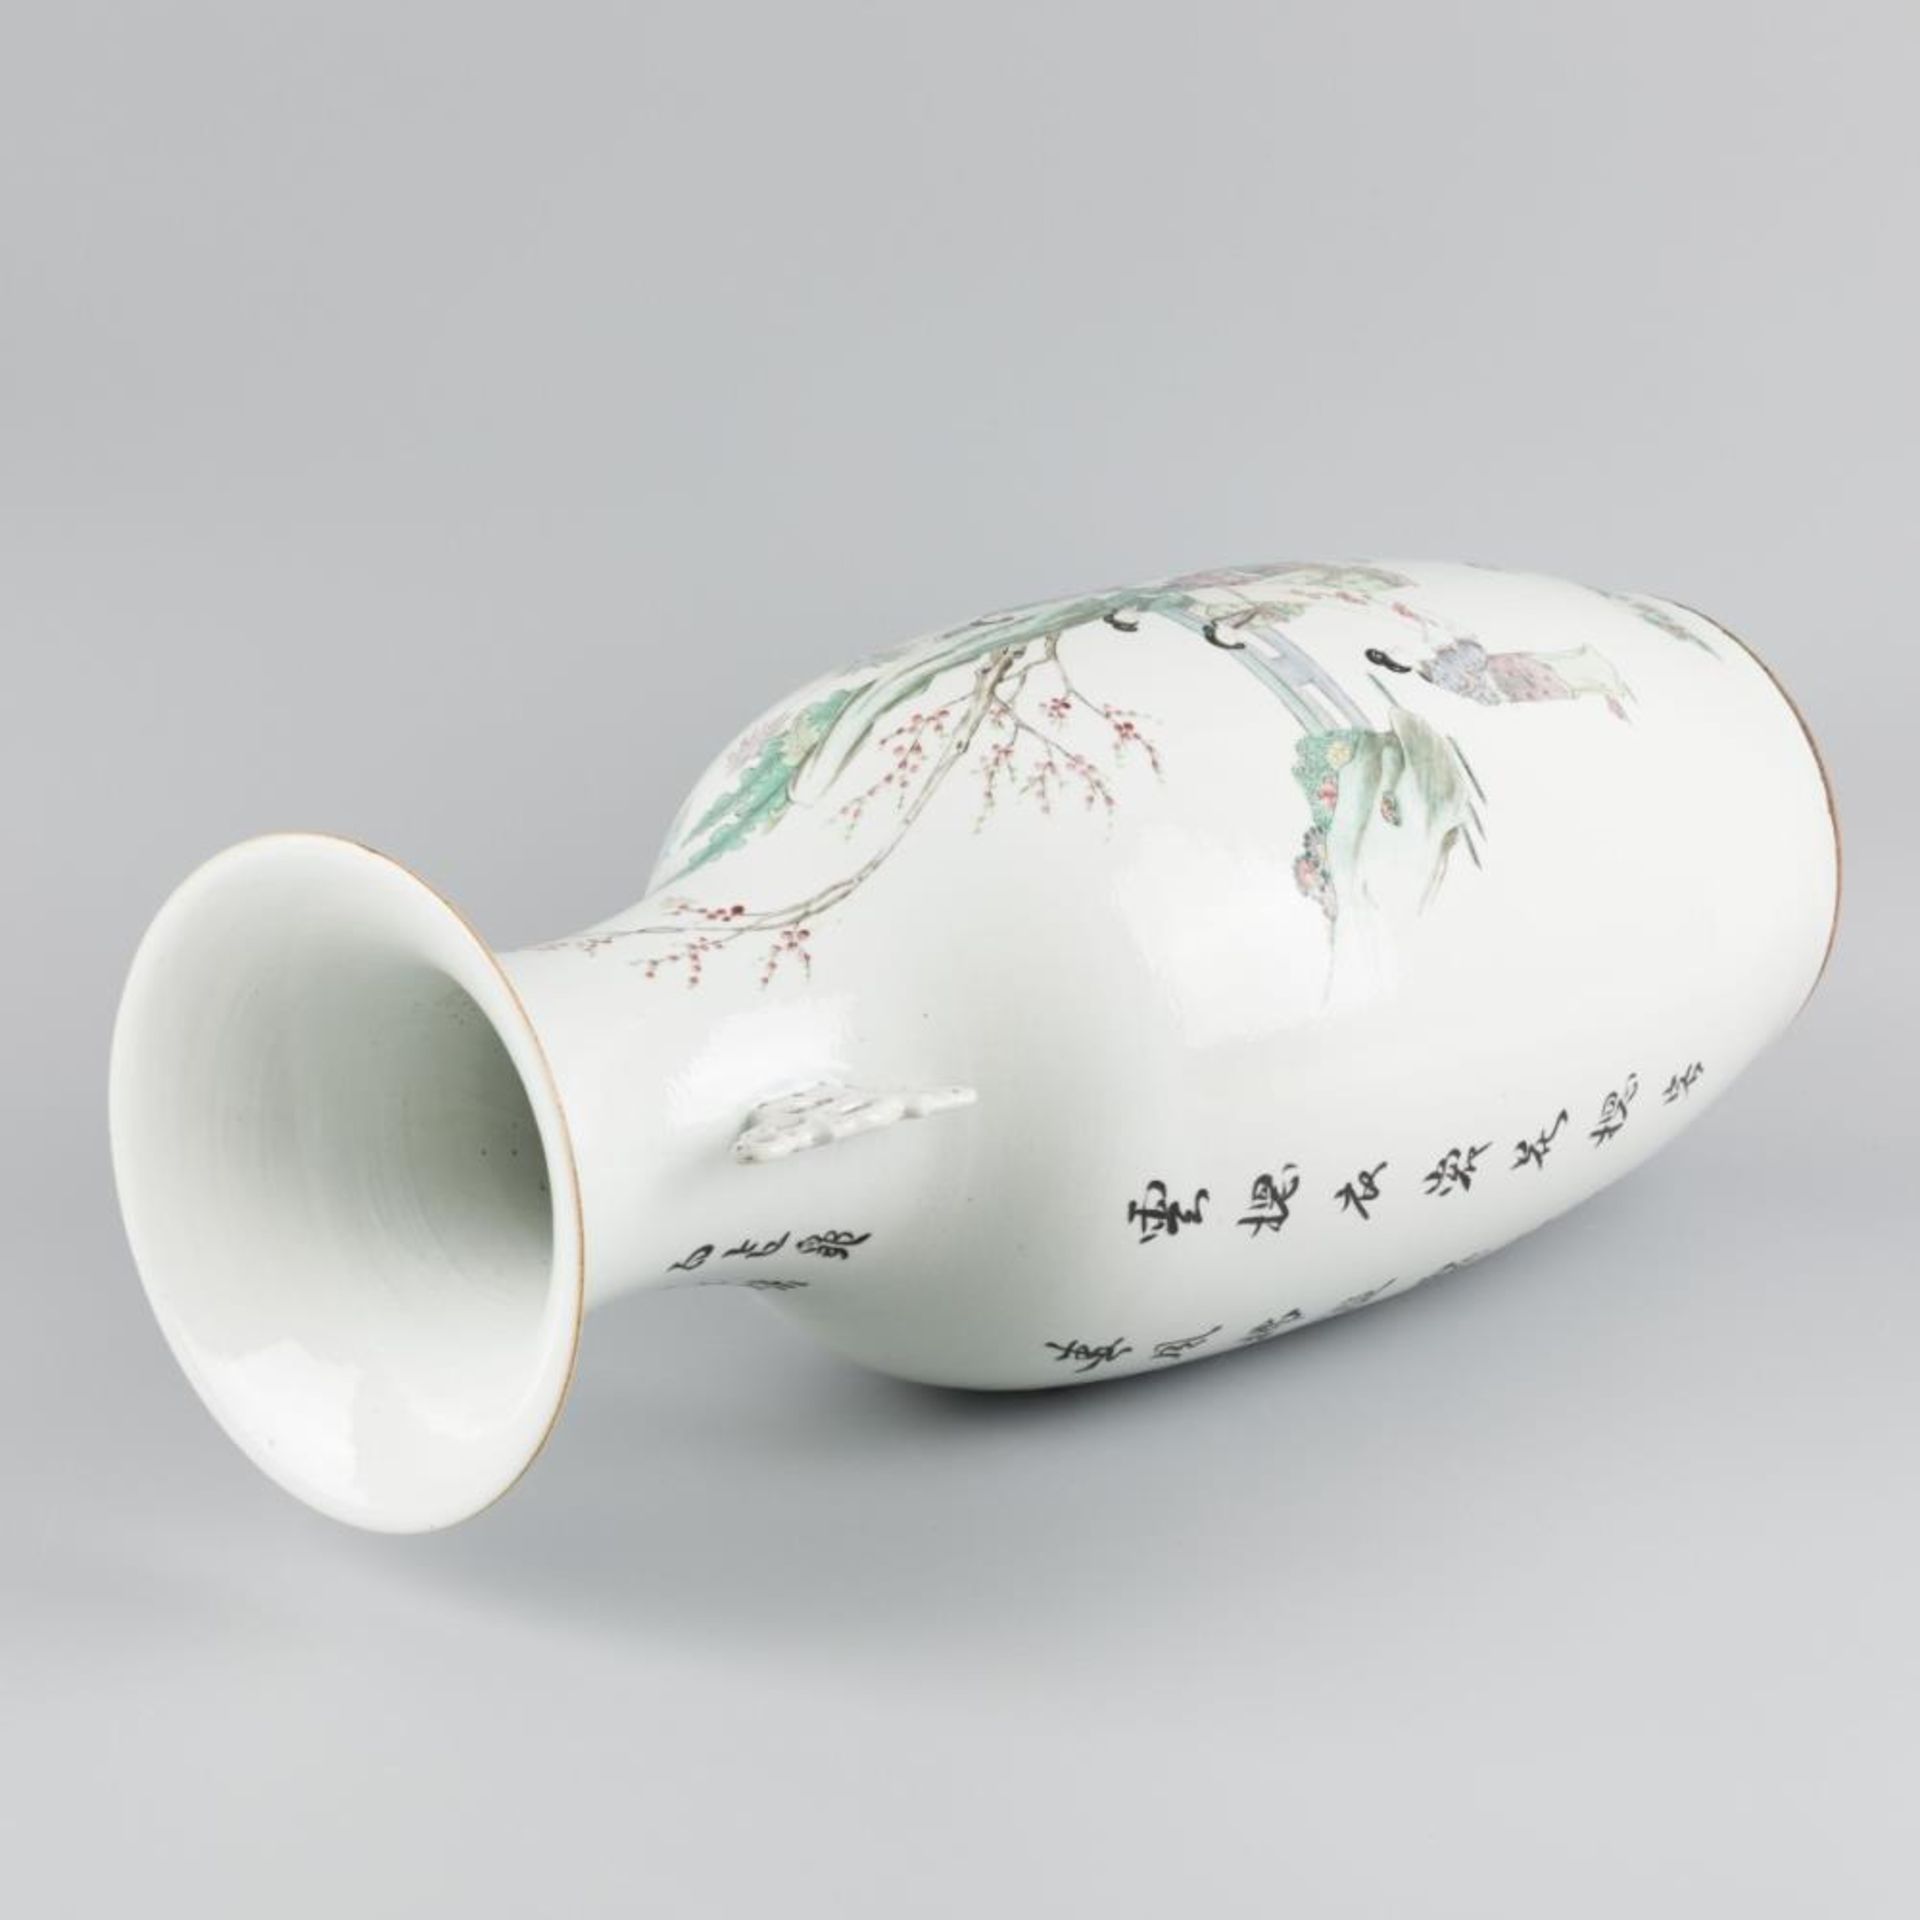 A vase with polychromed fencai décor, China, 20th century. - Image 3 of 3